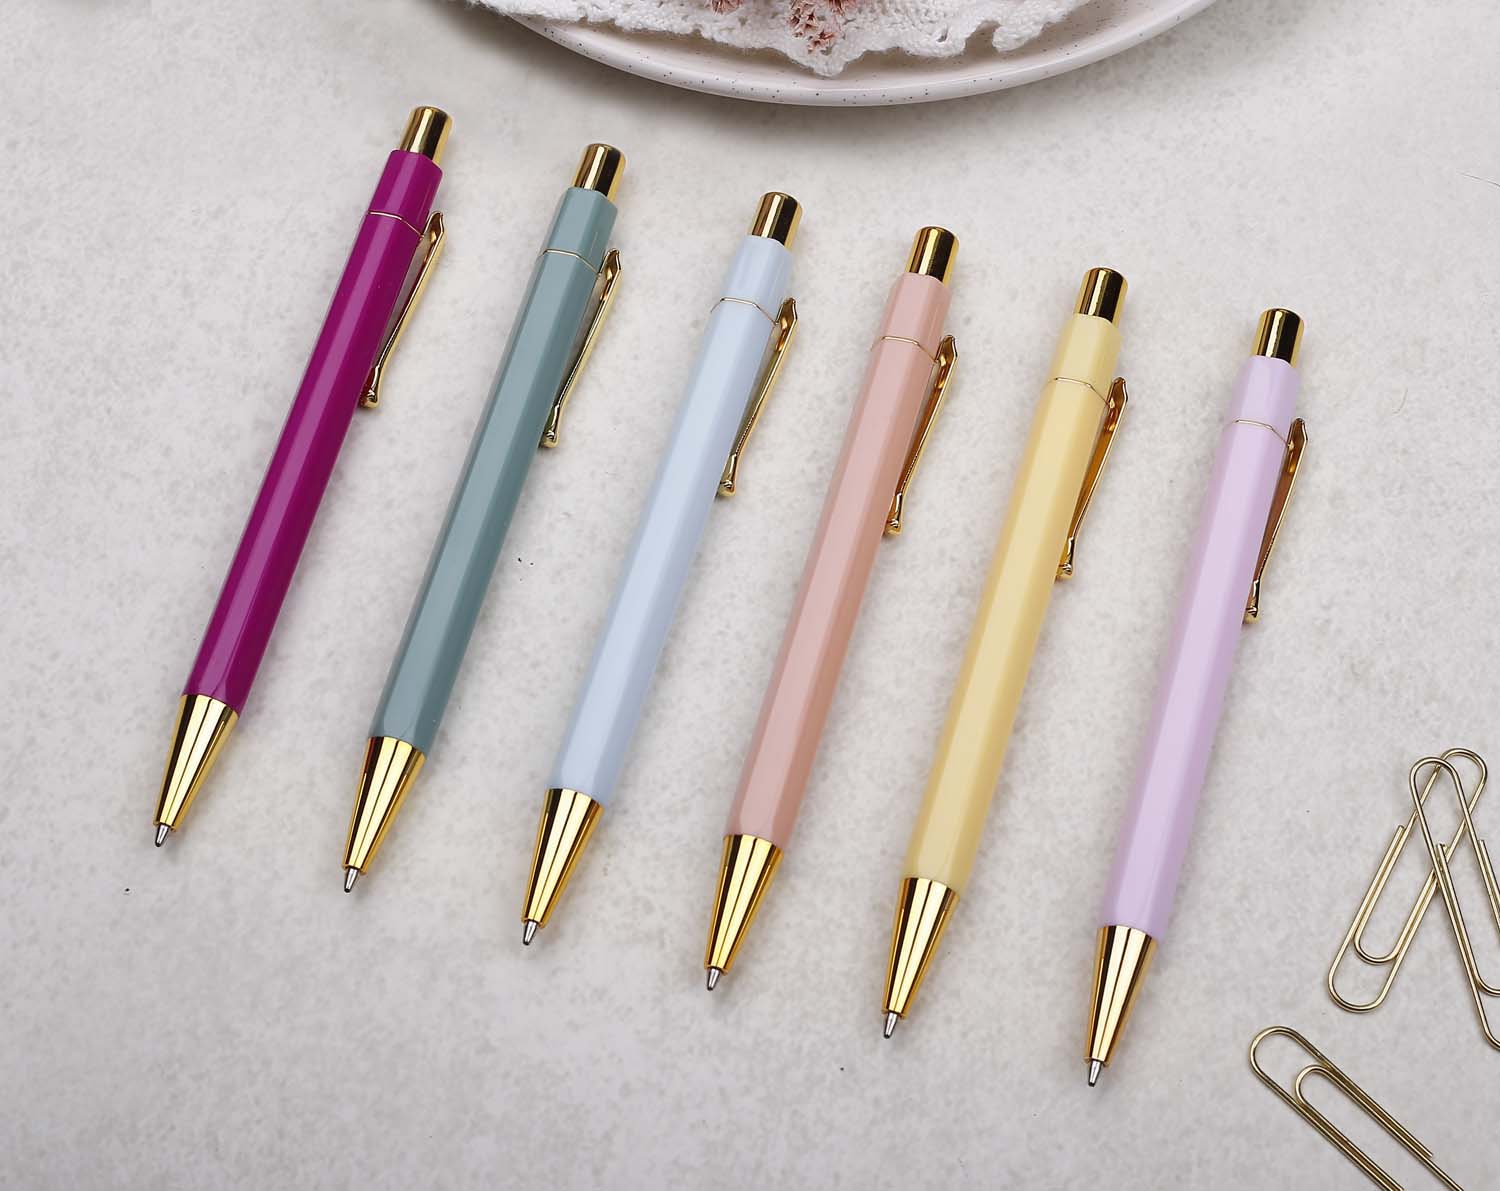 A premium magenta pink and gold pen with ballpoint tip and hexagonal barrel detail. 